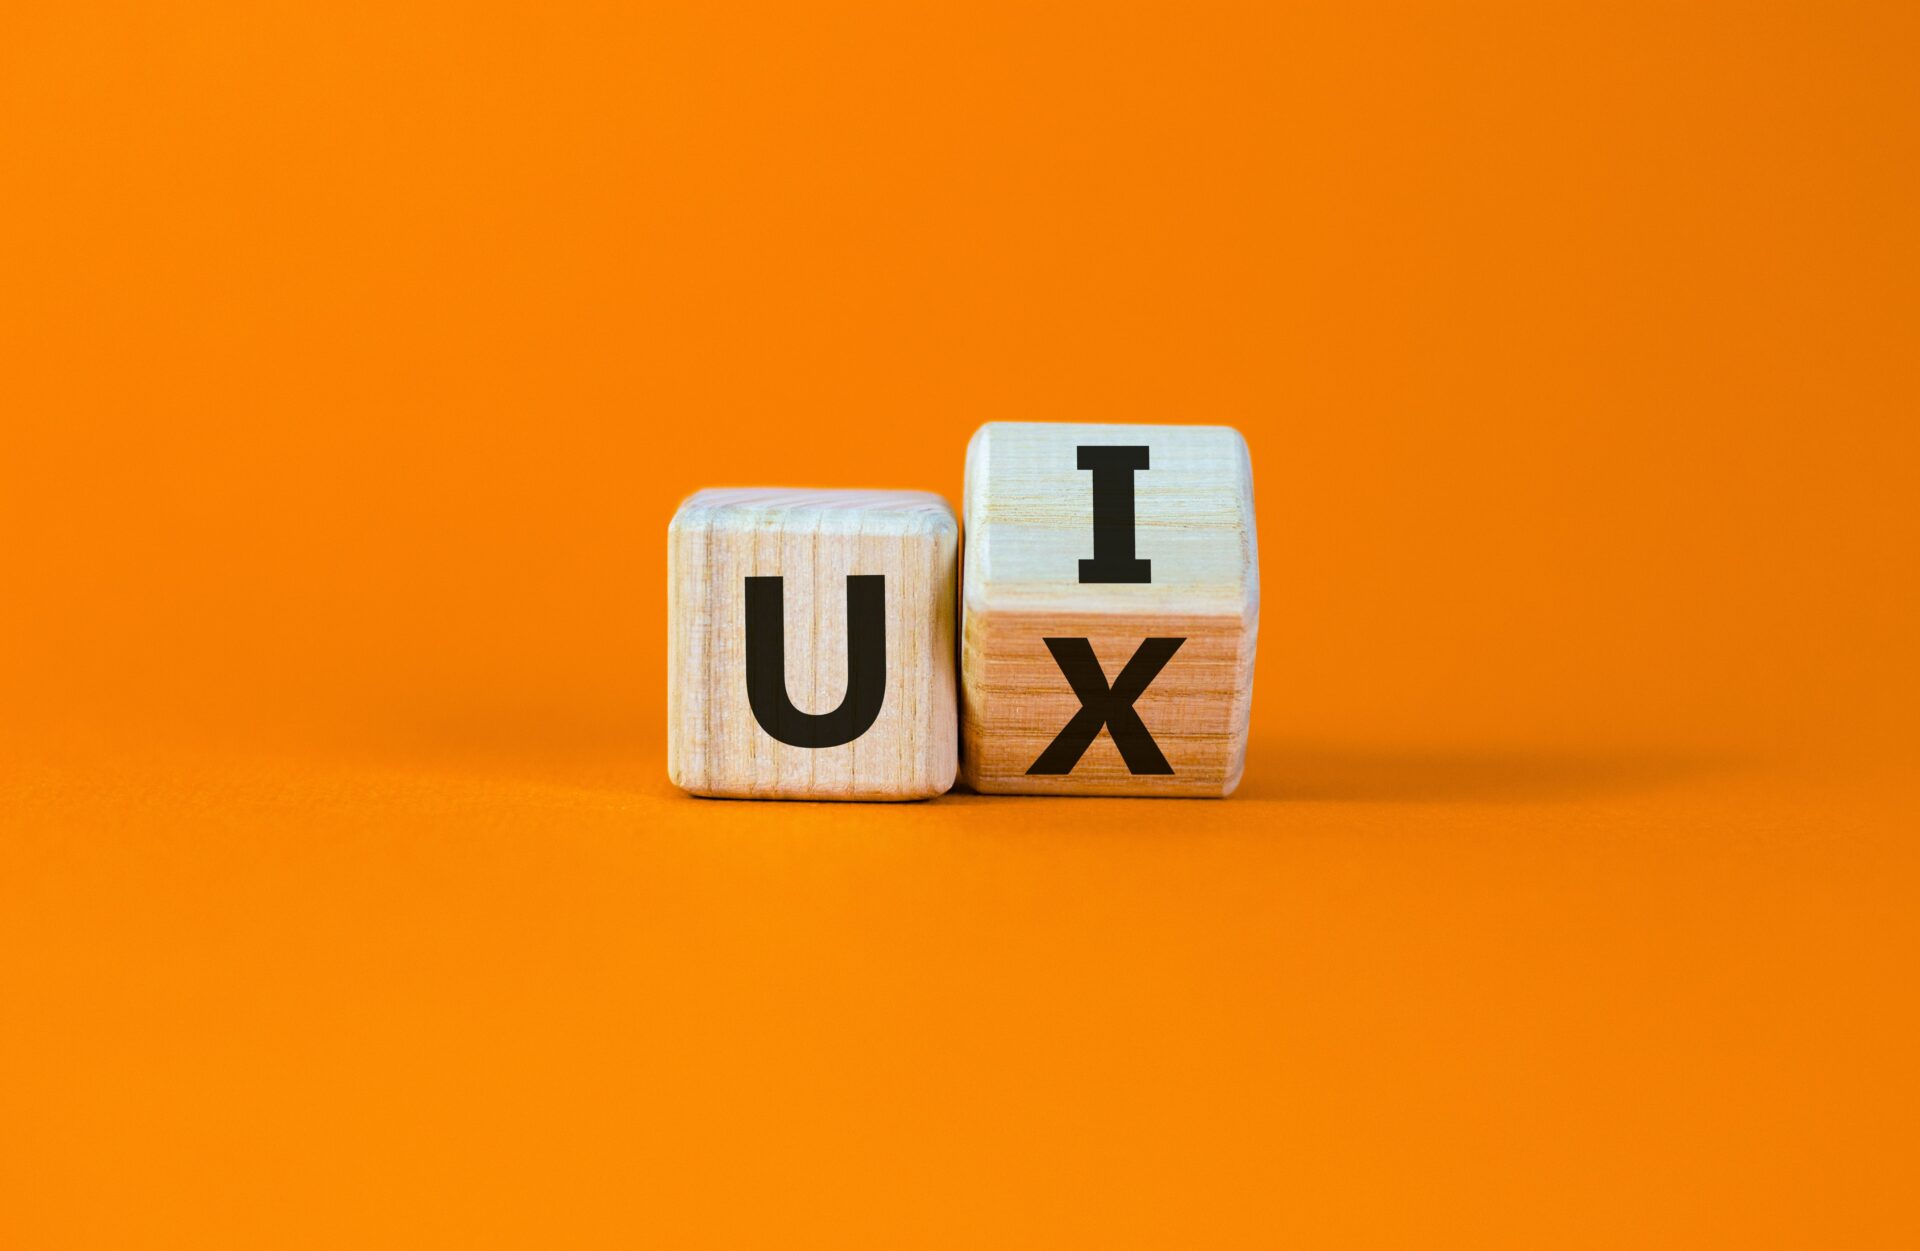 there is a difference between user interface and user experience